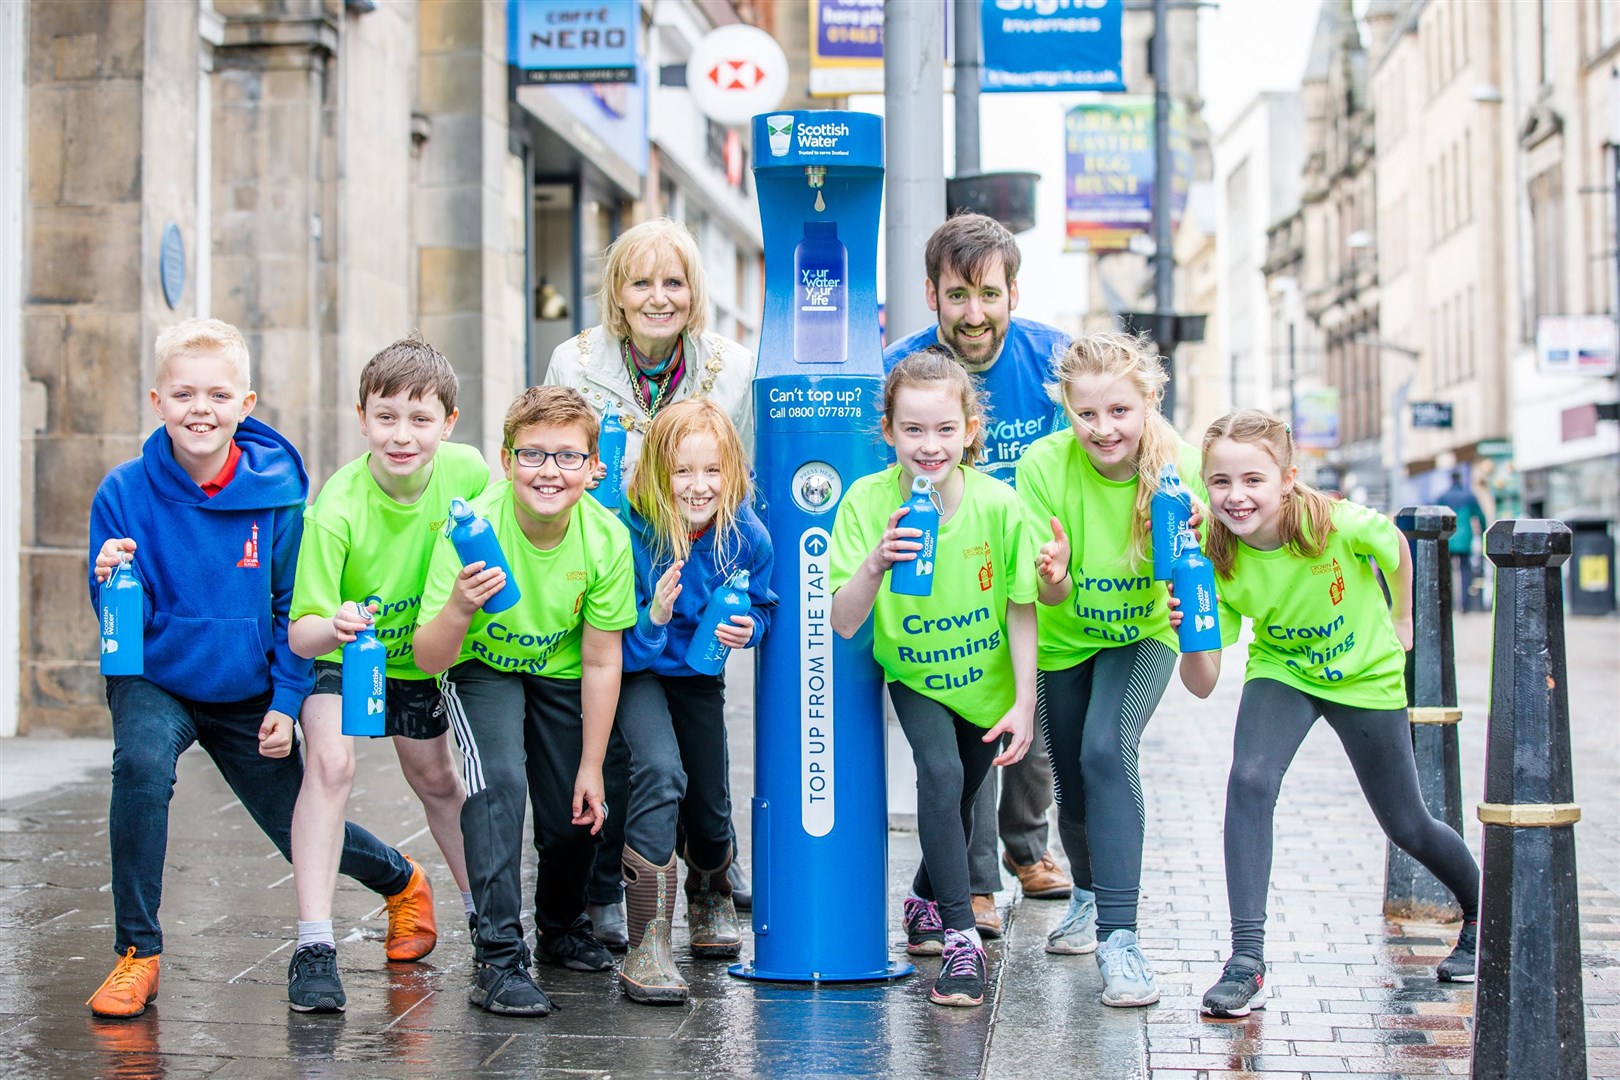 Scottish Water launch of the Top Up Tap on Inverness High Street.